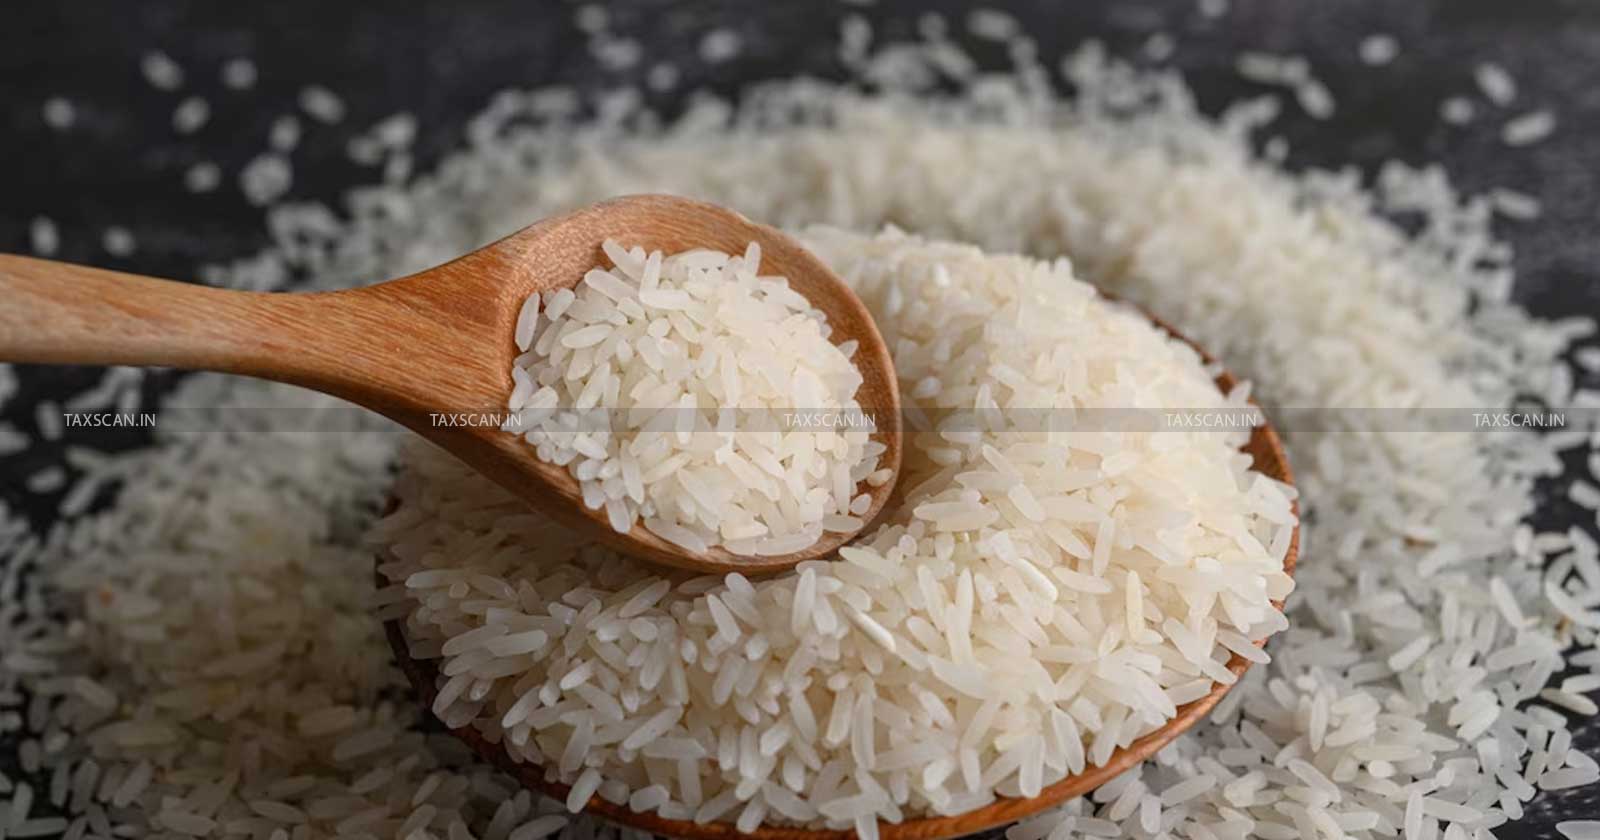 Central Govt - Export Notification of Non-Basmati White Rice - Export Notification - Non-Basmati White Rice - taxscan